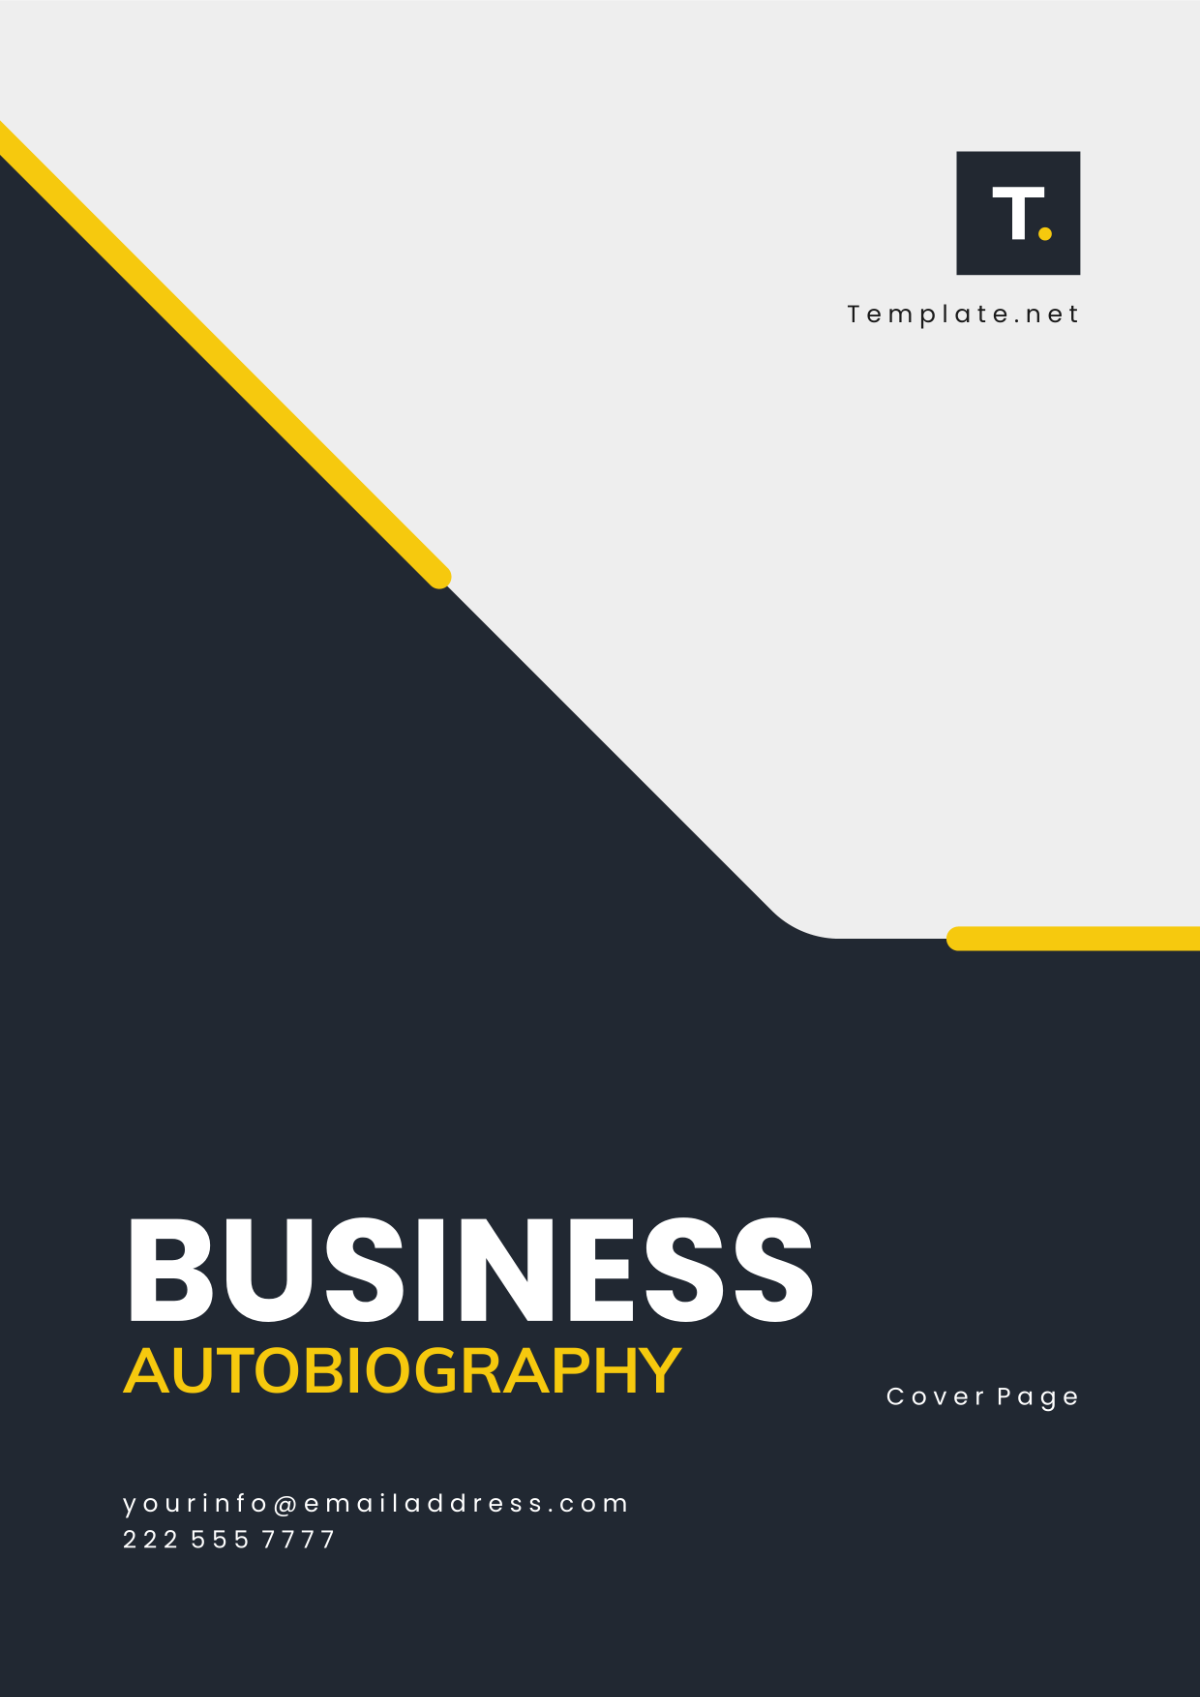 Free Business Autobiography Cover Page Template